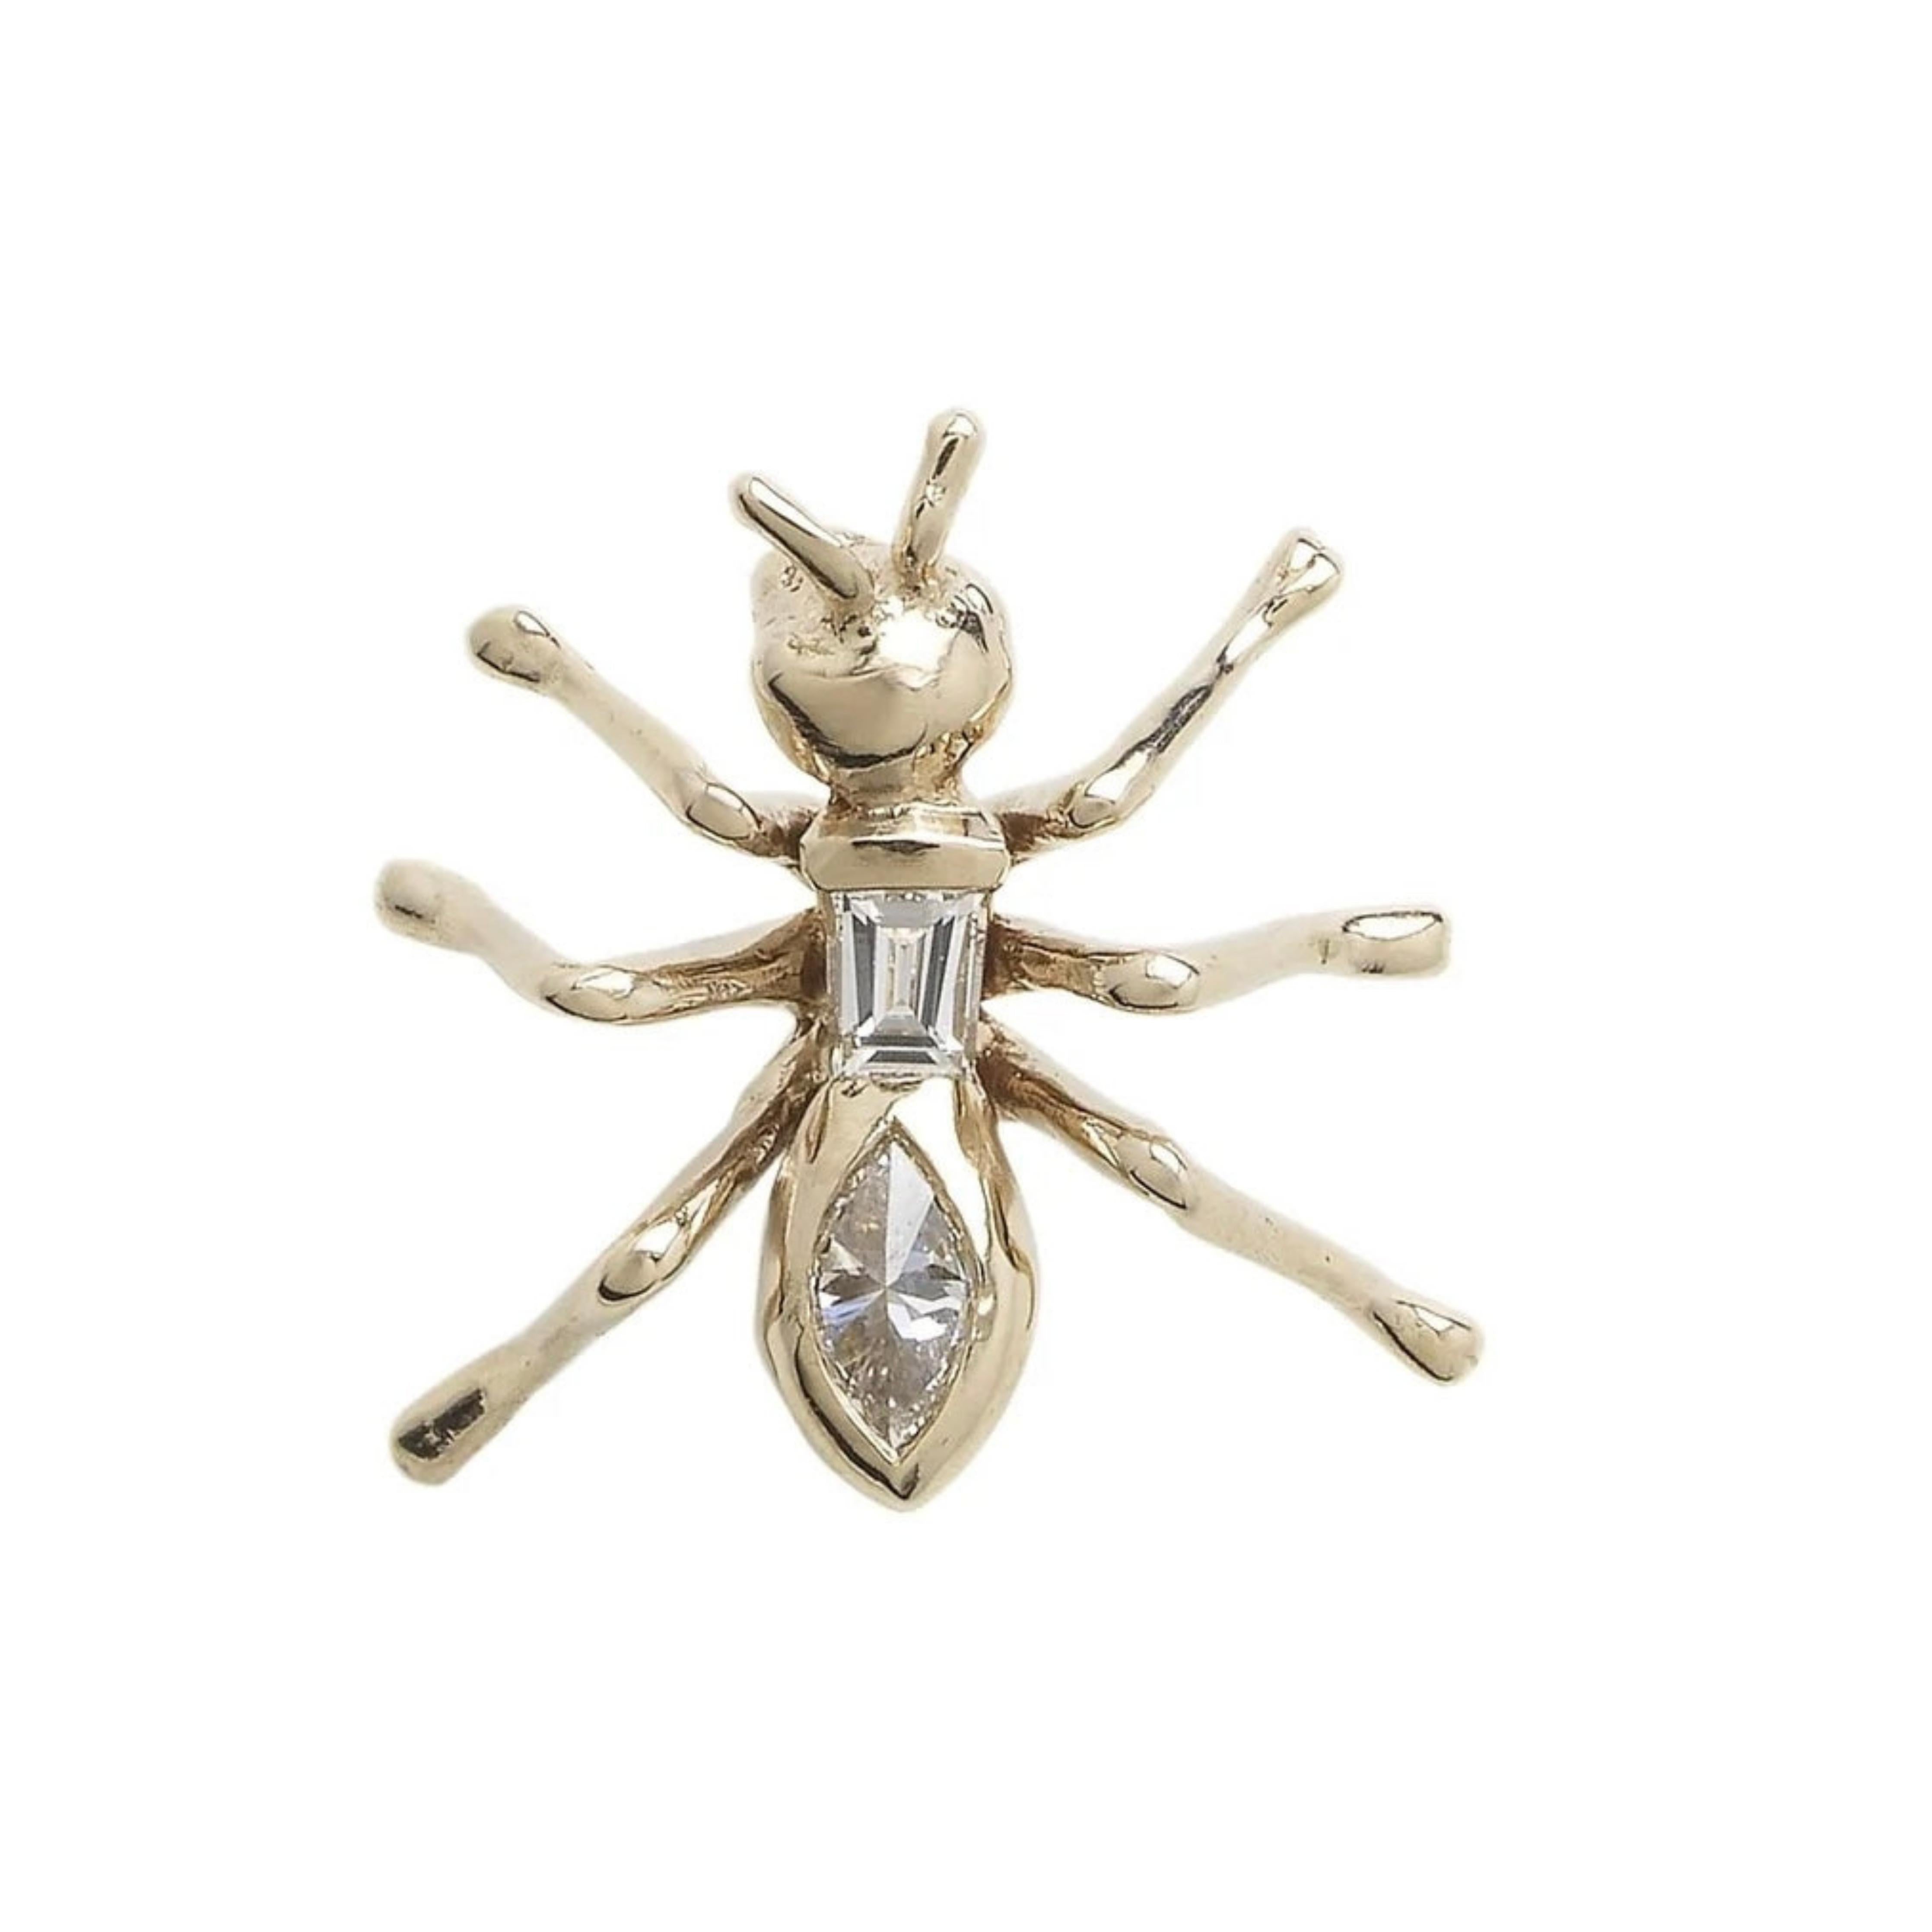 Bibi van der Velden Ant Single Stud Earring - White Diamond. Sculptural single earring in the shape of an ant with two white diamond stones forming the body. Earring shown from the top view.